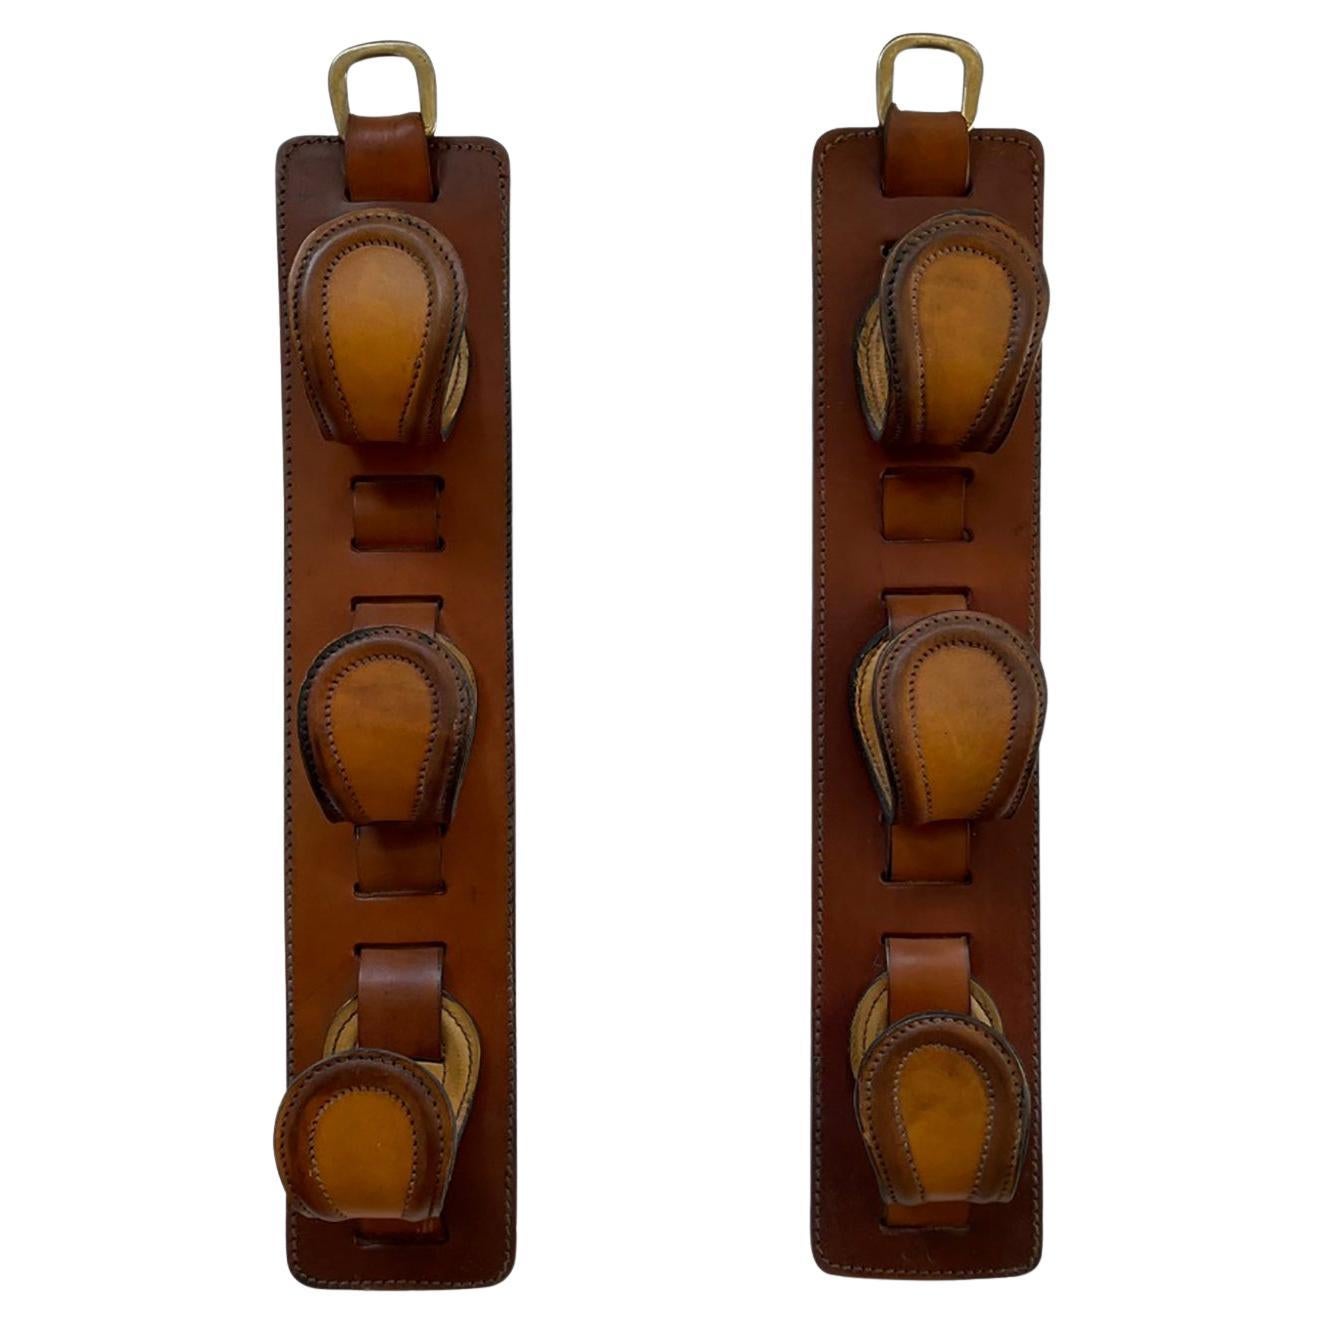 French Saddle Leather Wall Hooks in the style of Jacques Adnet